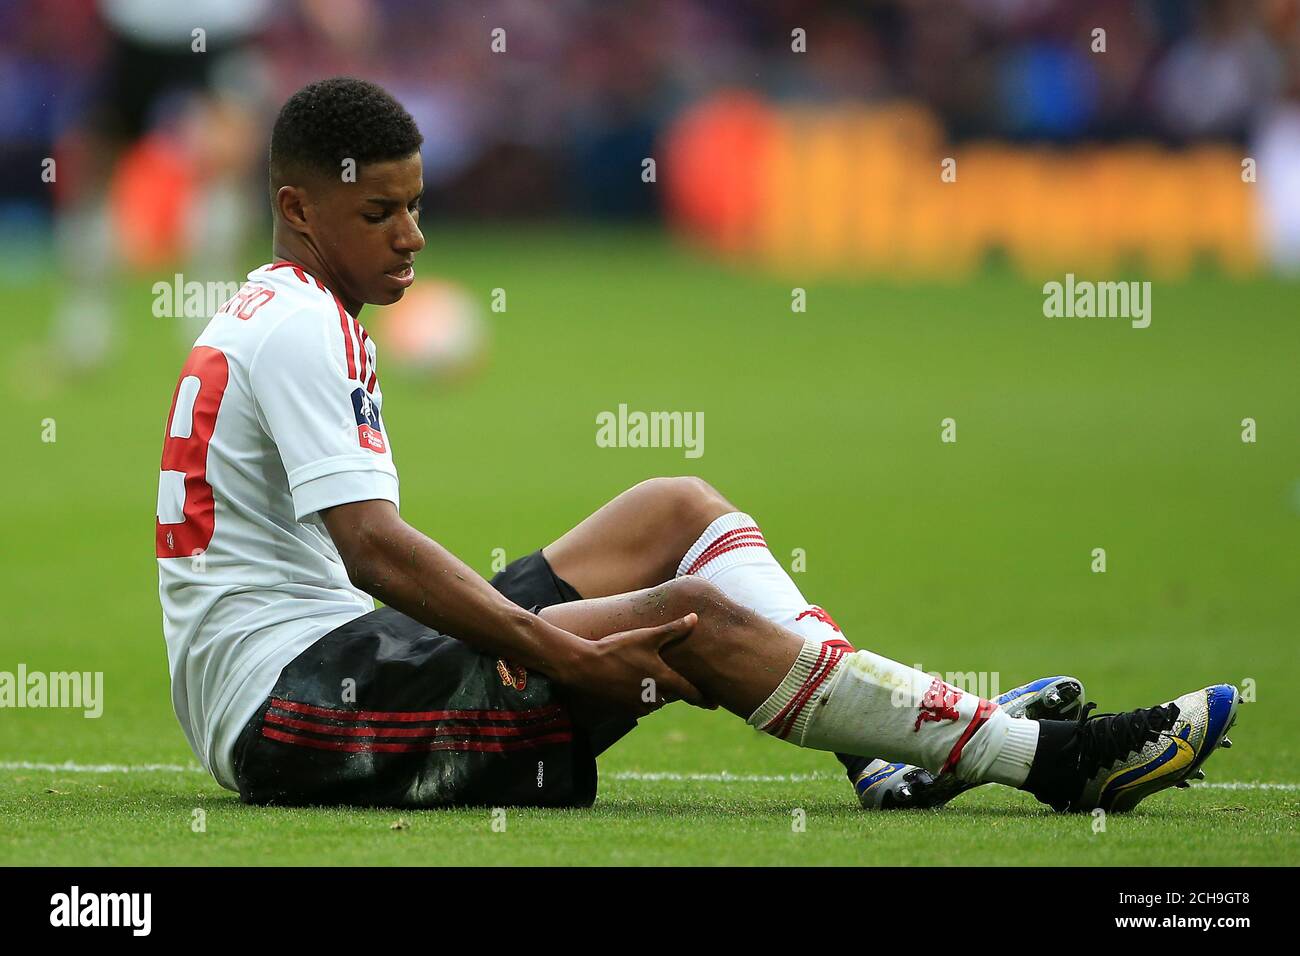 Manchester United s Marcus Rashford holds his knee after taking a